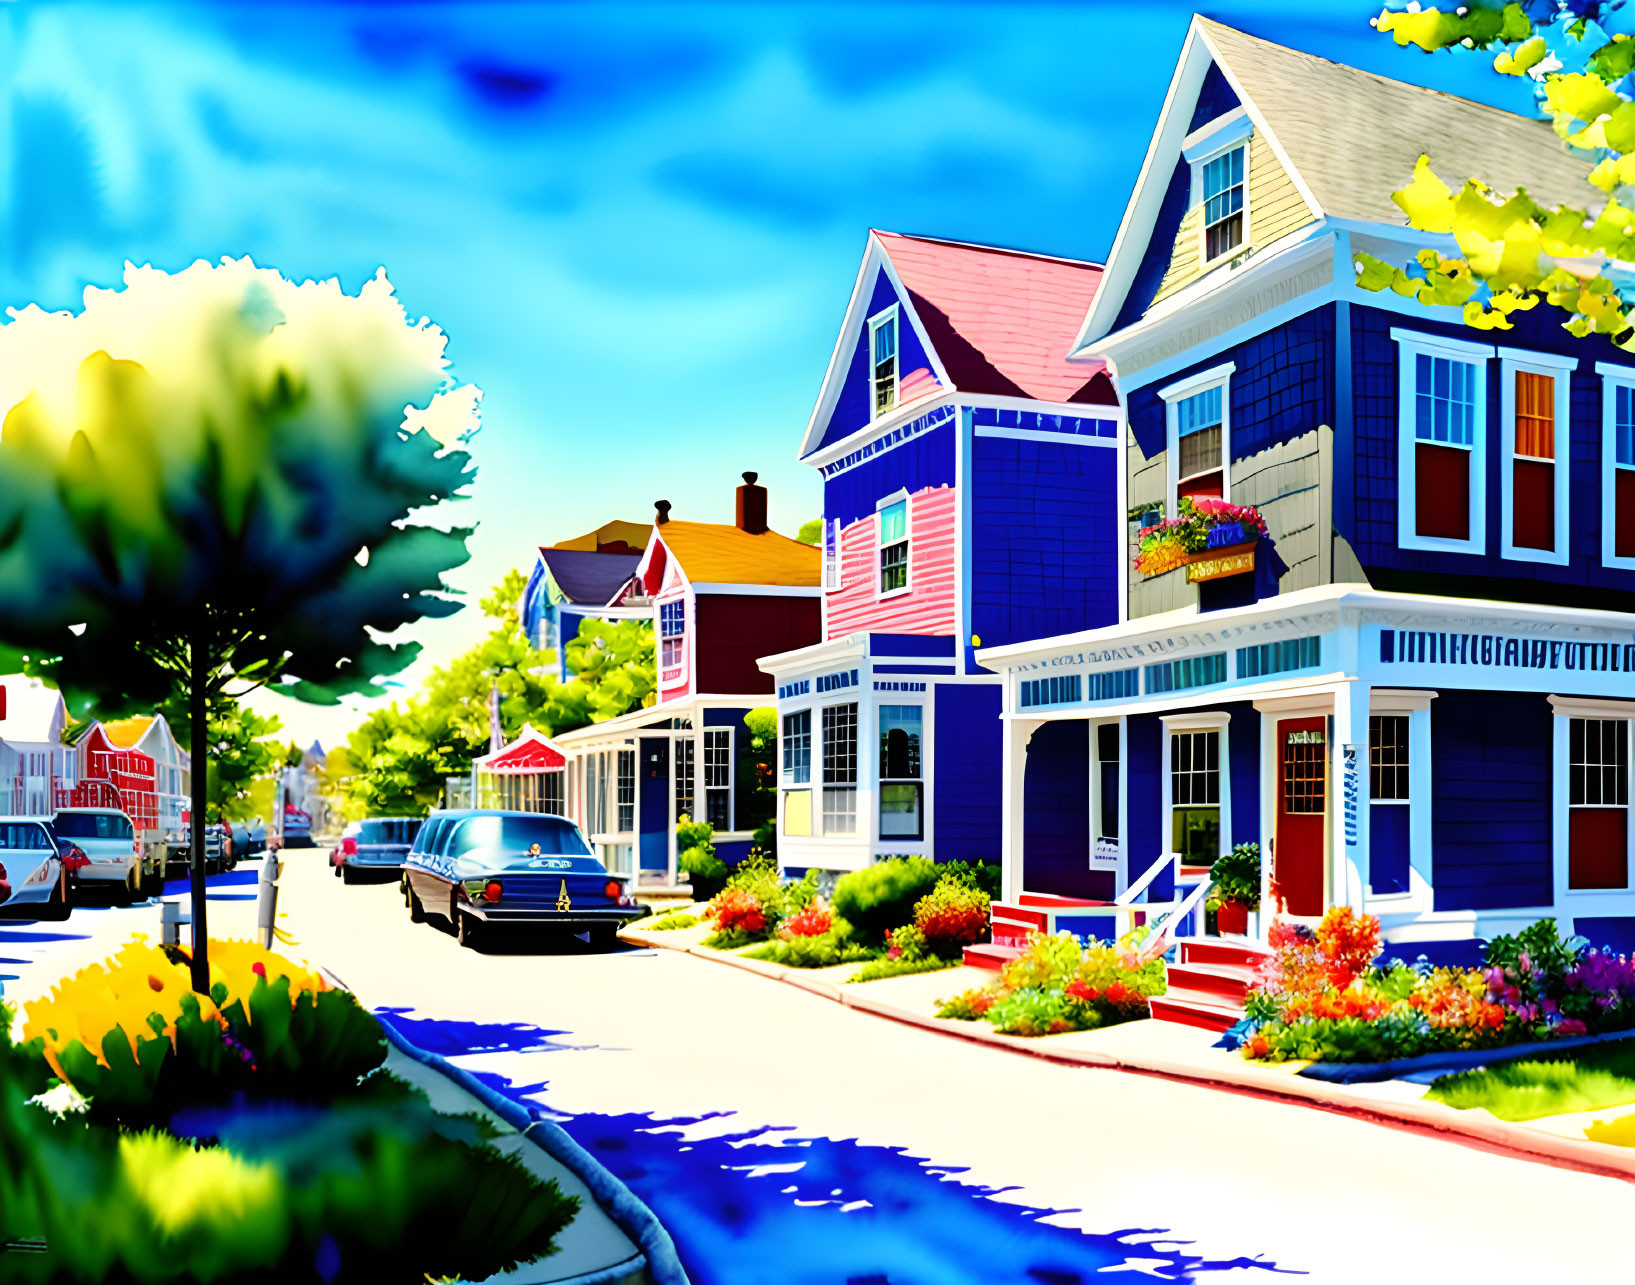 Vibrant blue and red houses on colorful suburban street